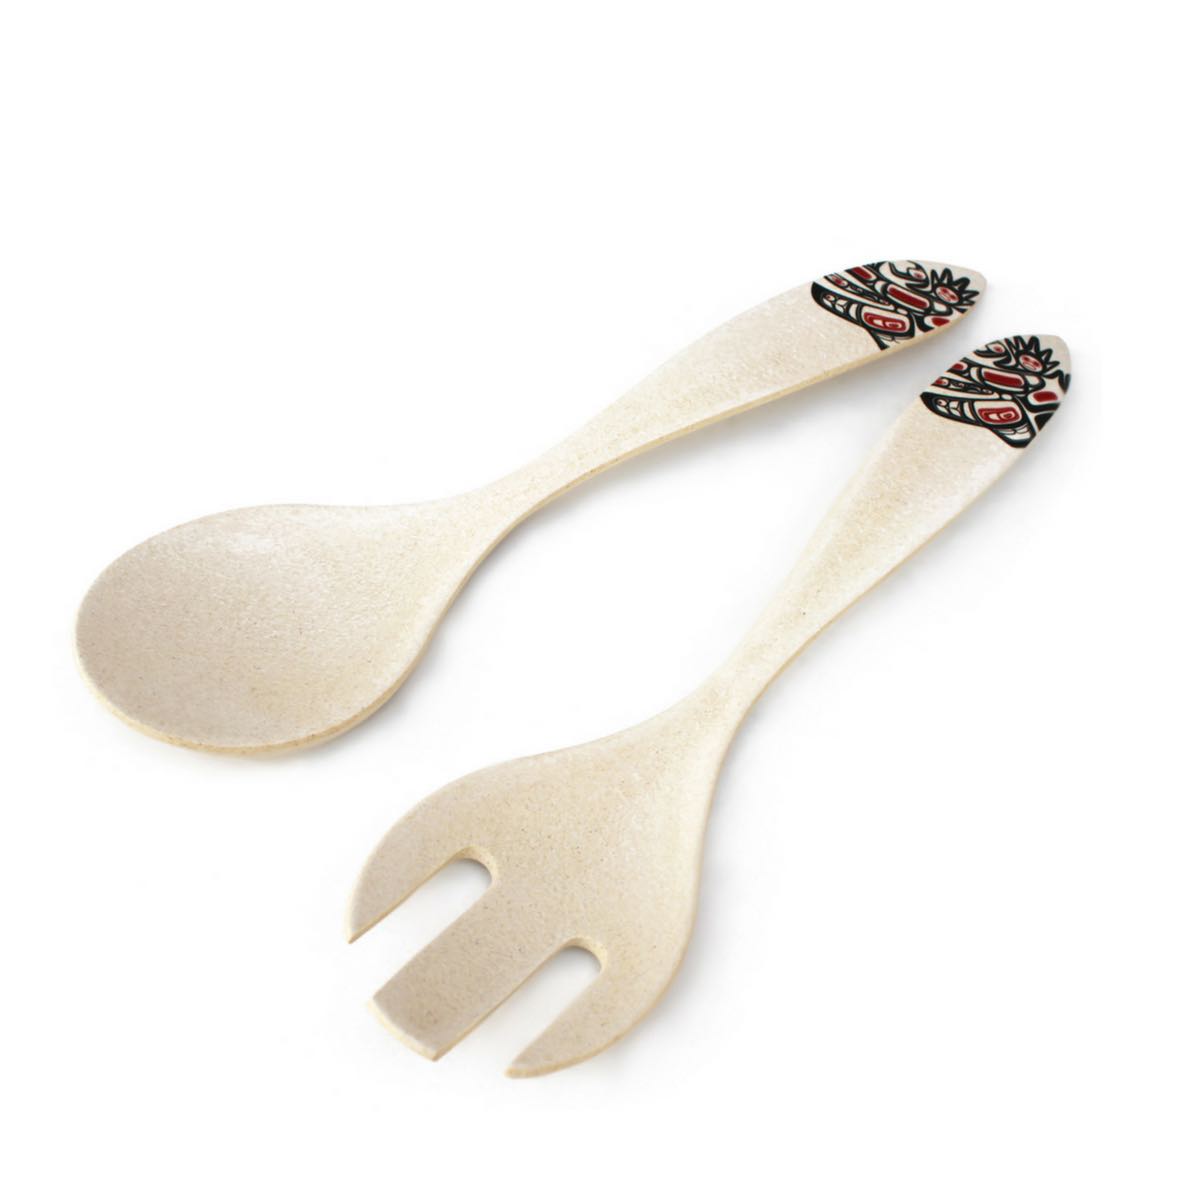 BAMBOO SALAD SERVERS - Running Raven - BFSGR - House of Himwitsa Native Art Gallery and Gifts